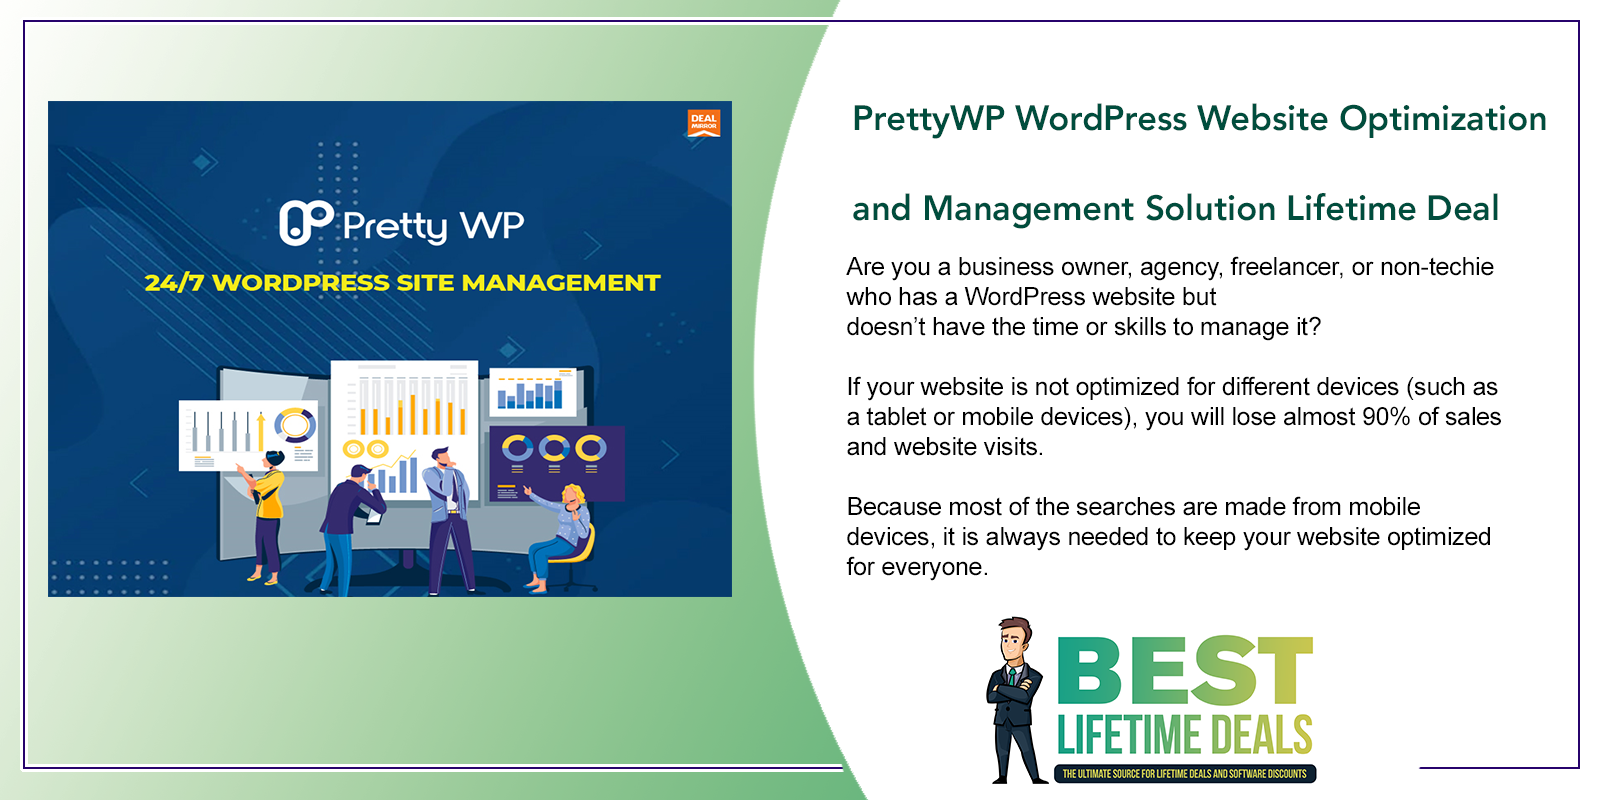 PrettyWP WordPress Website Optimization and Management Solution Lifetime Deal Featured Image